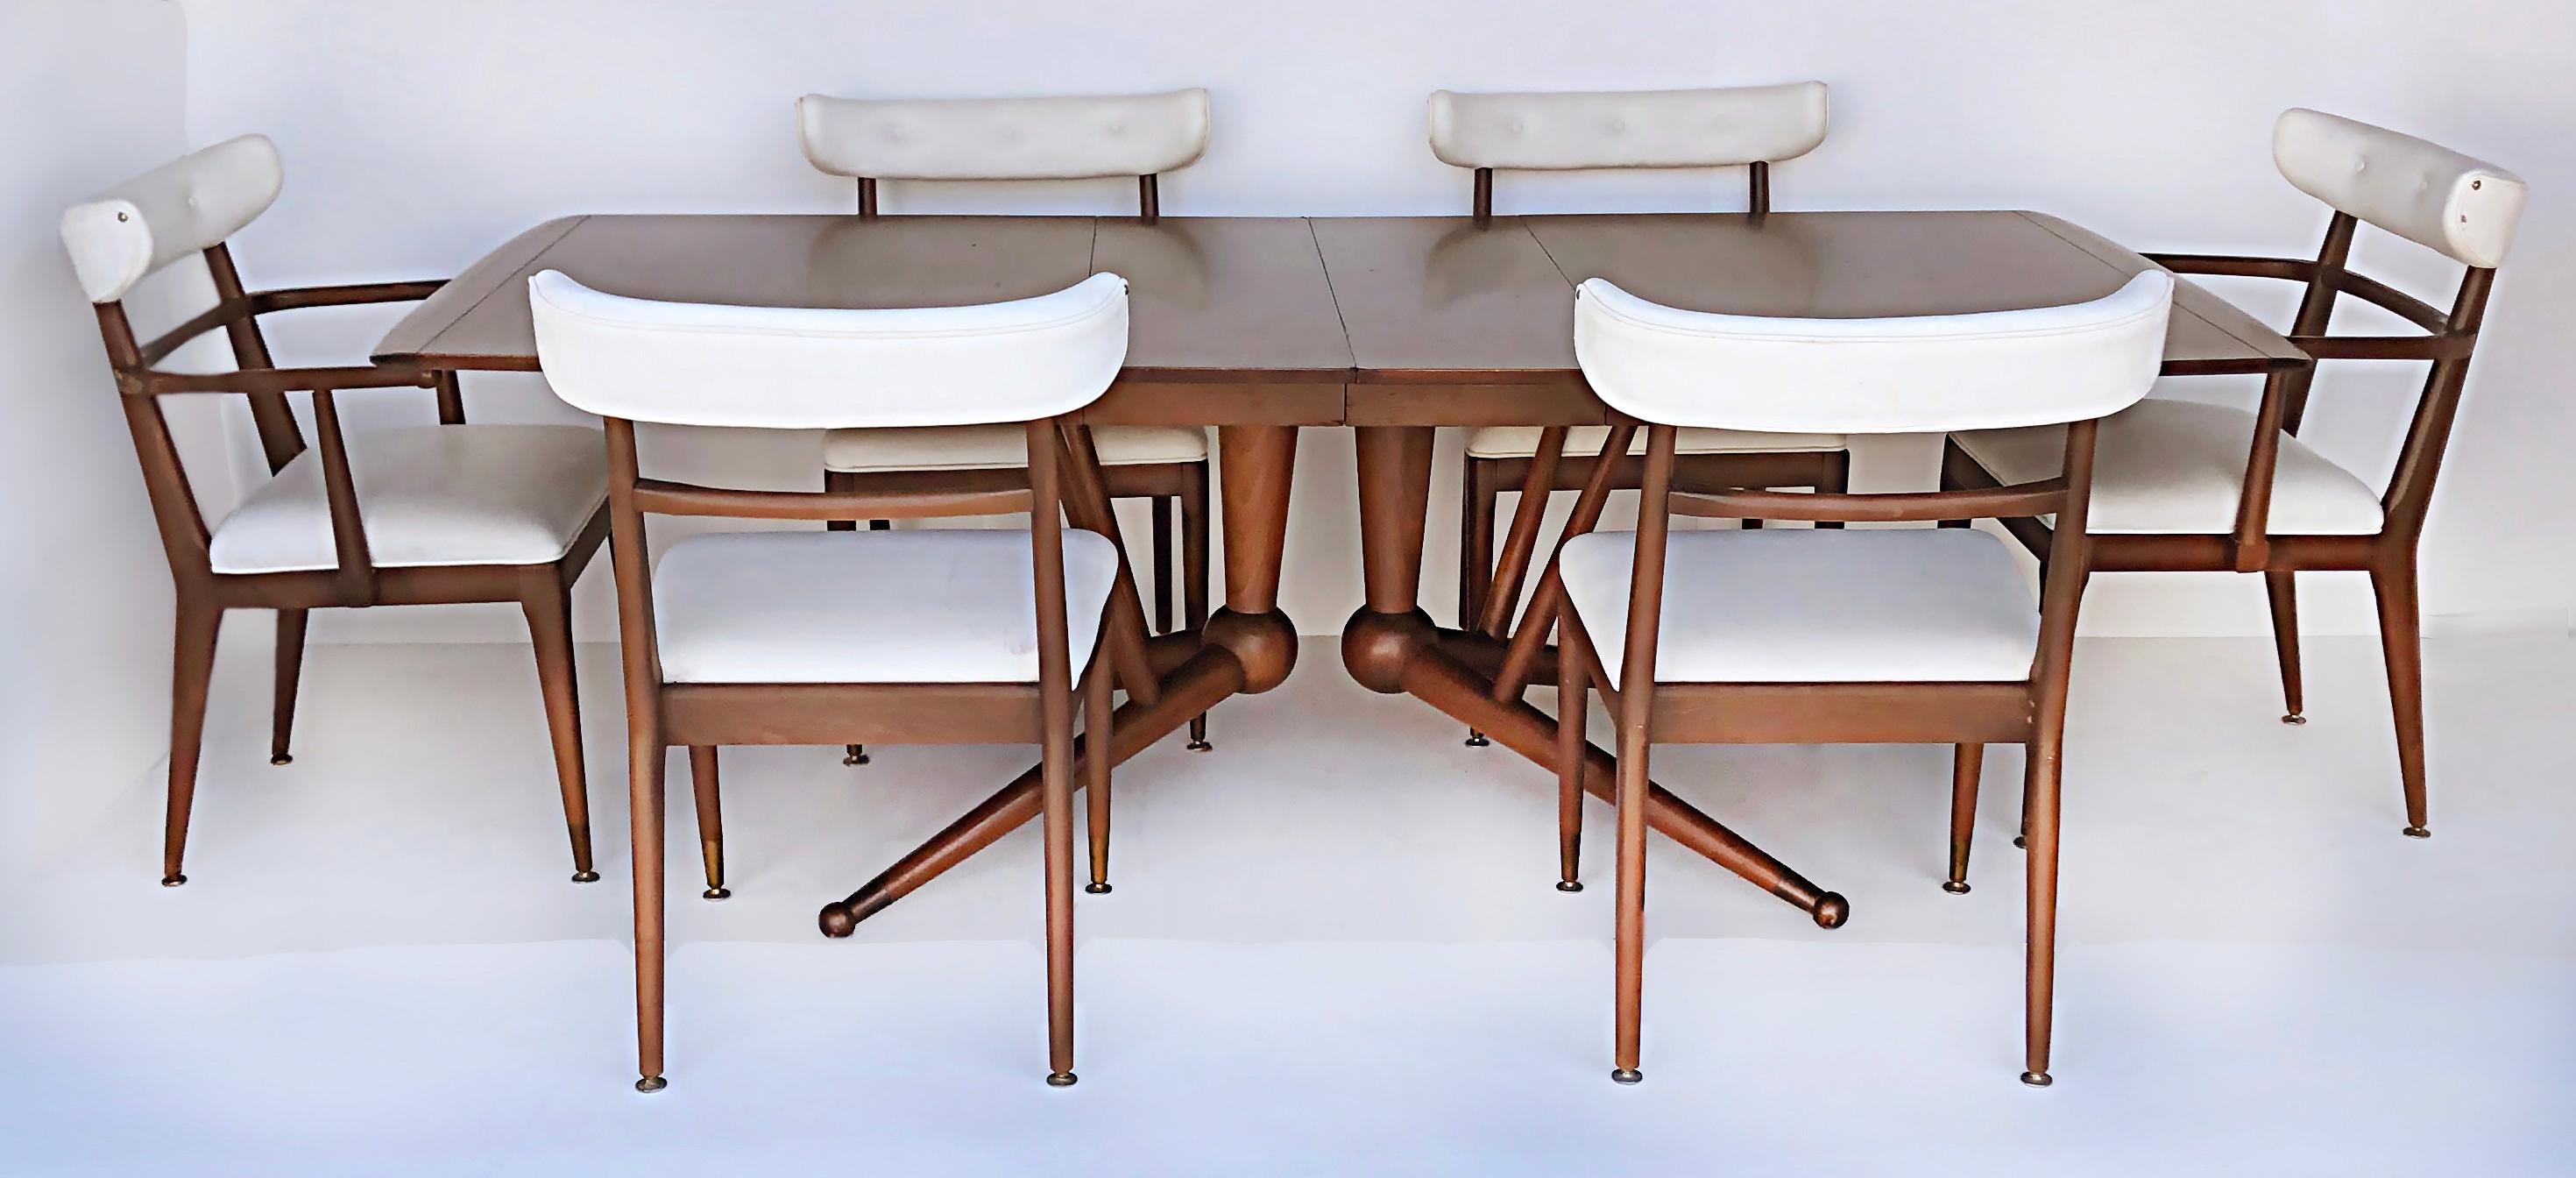 American Mid-Century Modernist dining chairs, set of 6.

Offered for sale is a set of six American mid-century modernist dining chairs including two armchairs and four side chairs. The chairs are upholstered in vintage white Naugahyde and have